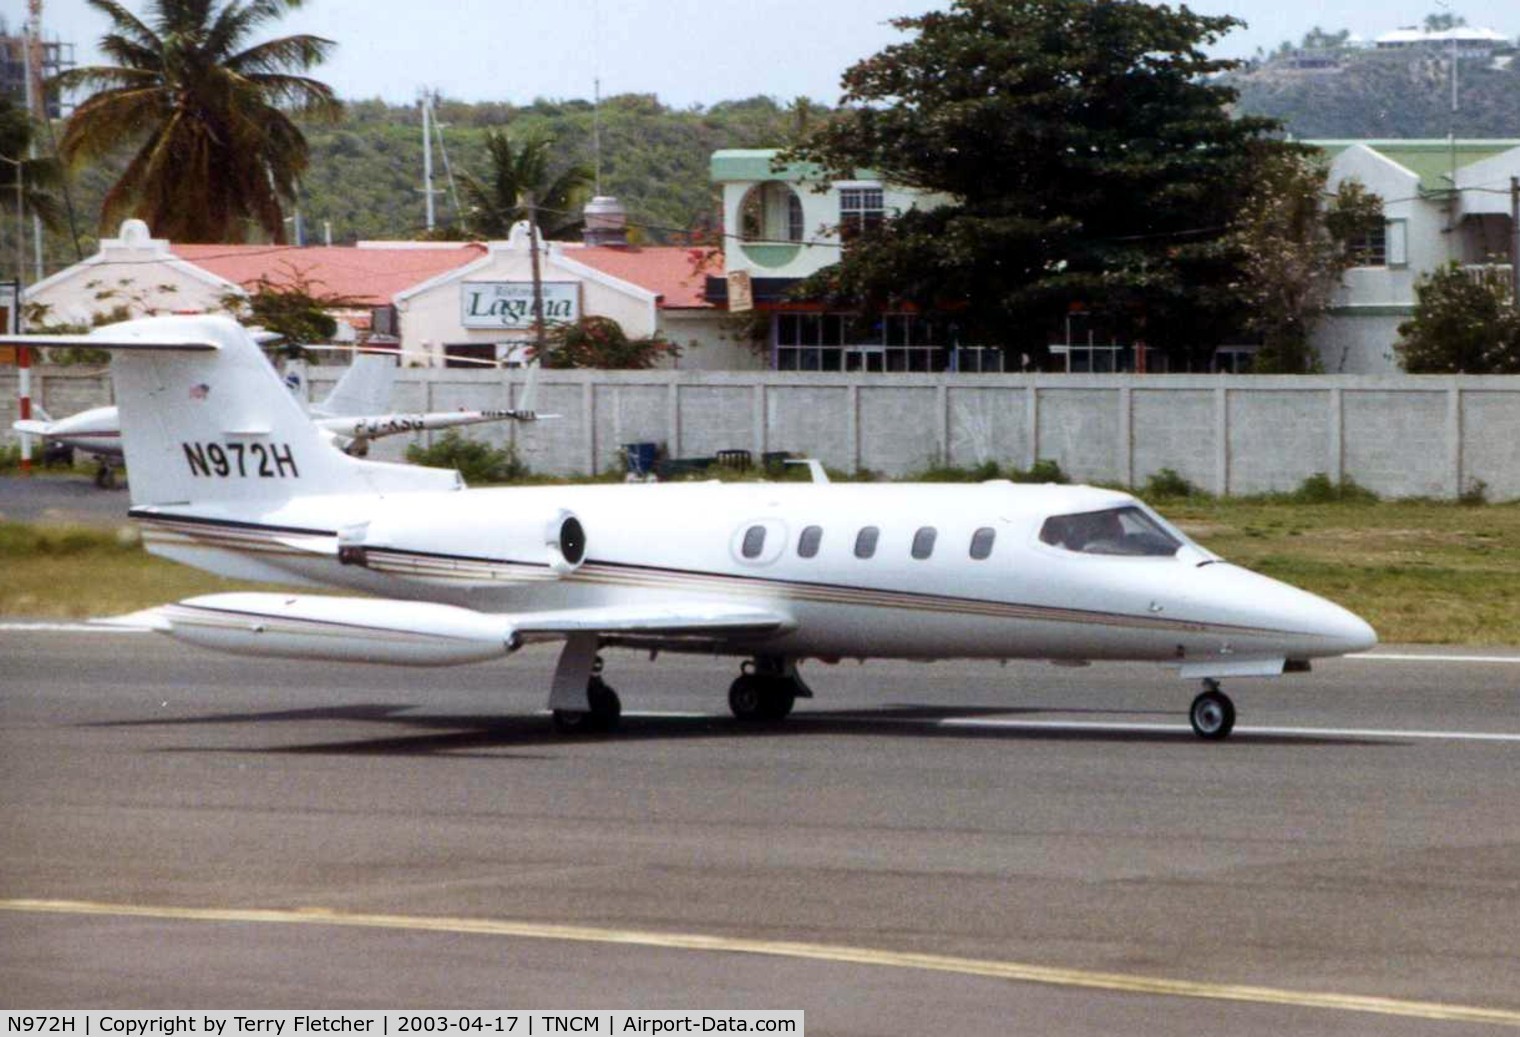 N972H, 1976 Learjet 24D C/N 322, N972H was a Learjet 25 c/n 370 seen here at St.Maarten in 1993 . Subsequently became N888DV